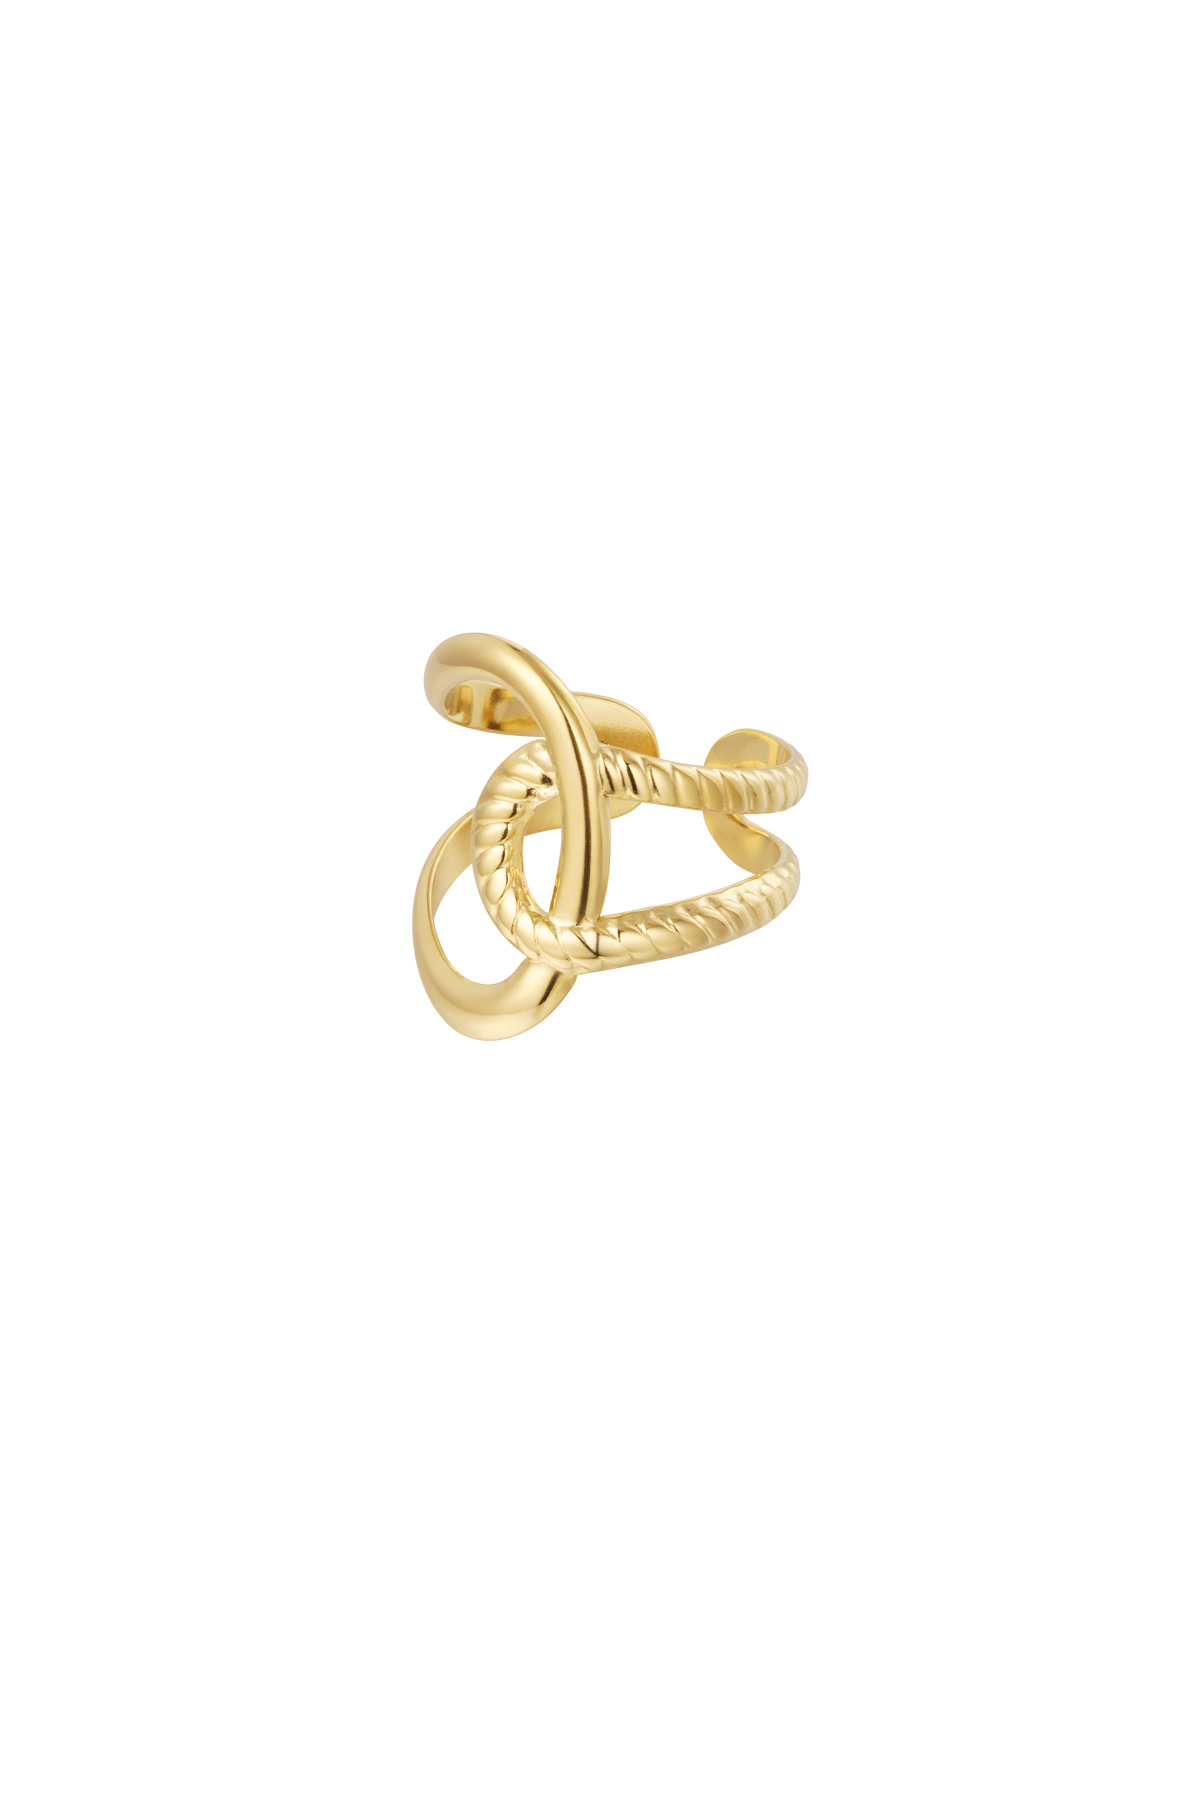 Ring knot detail - gold